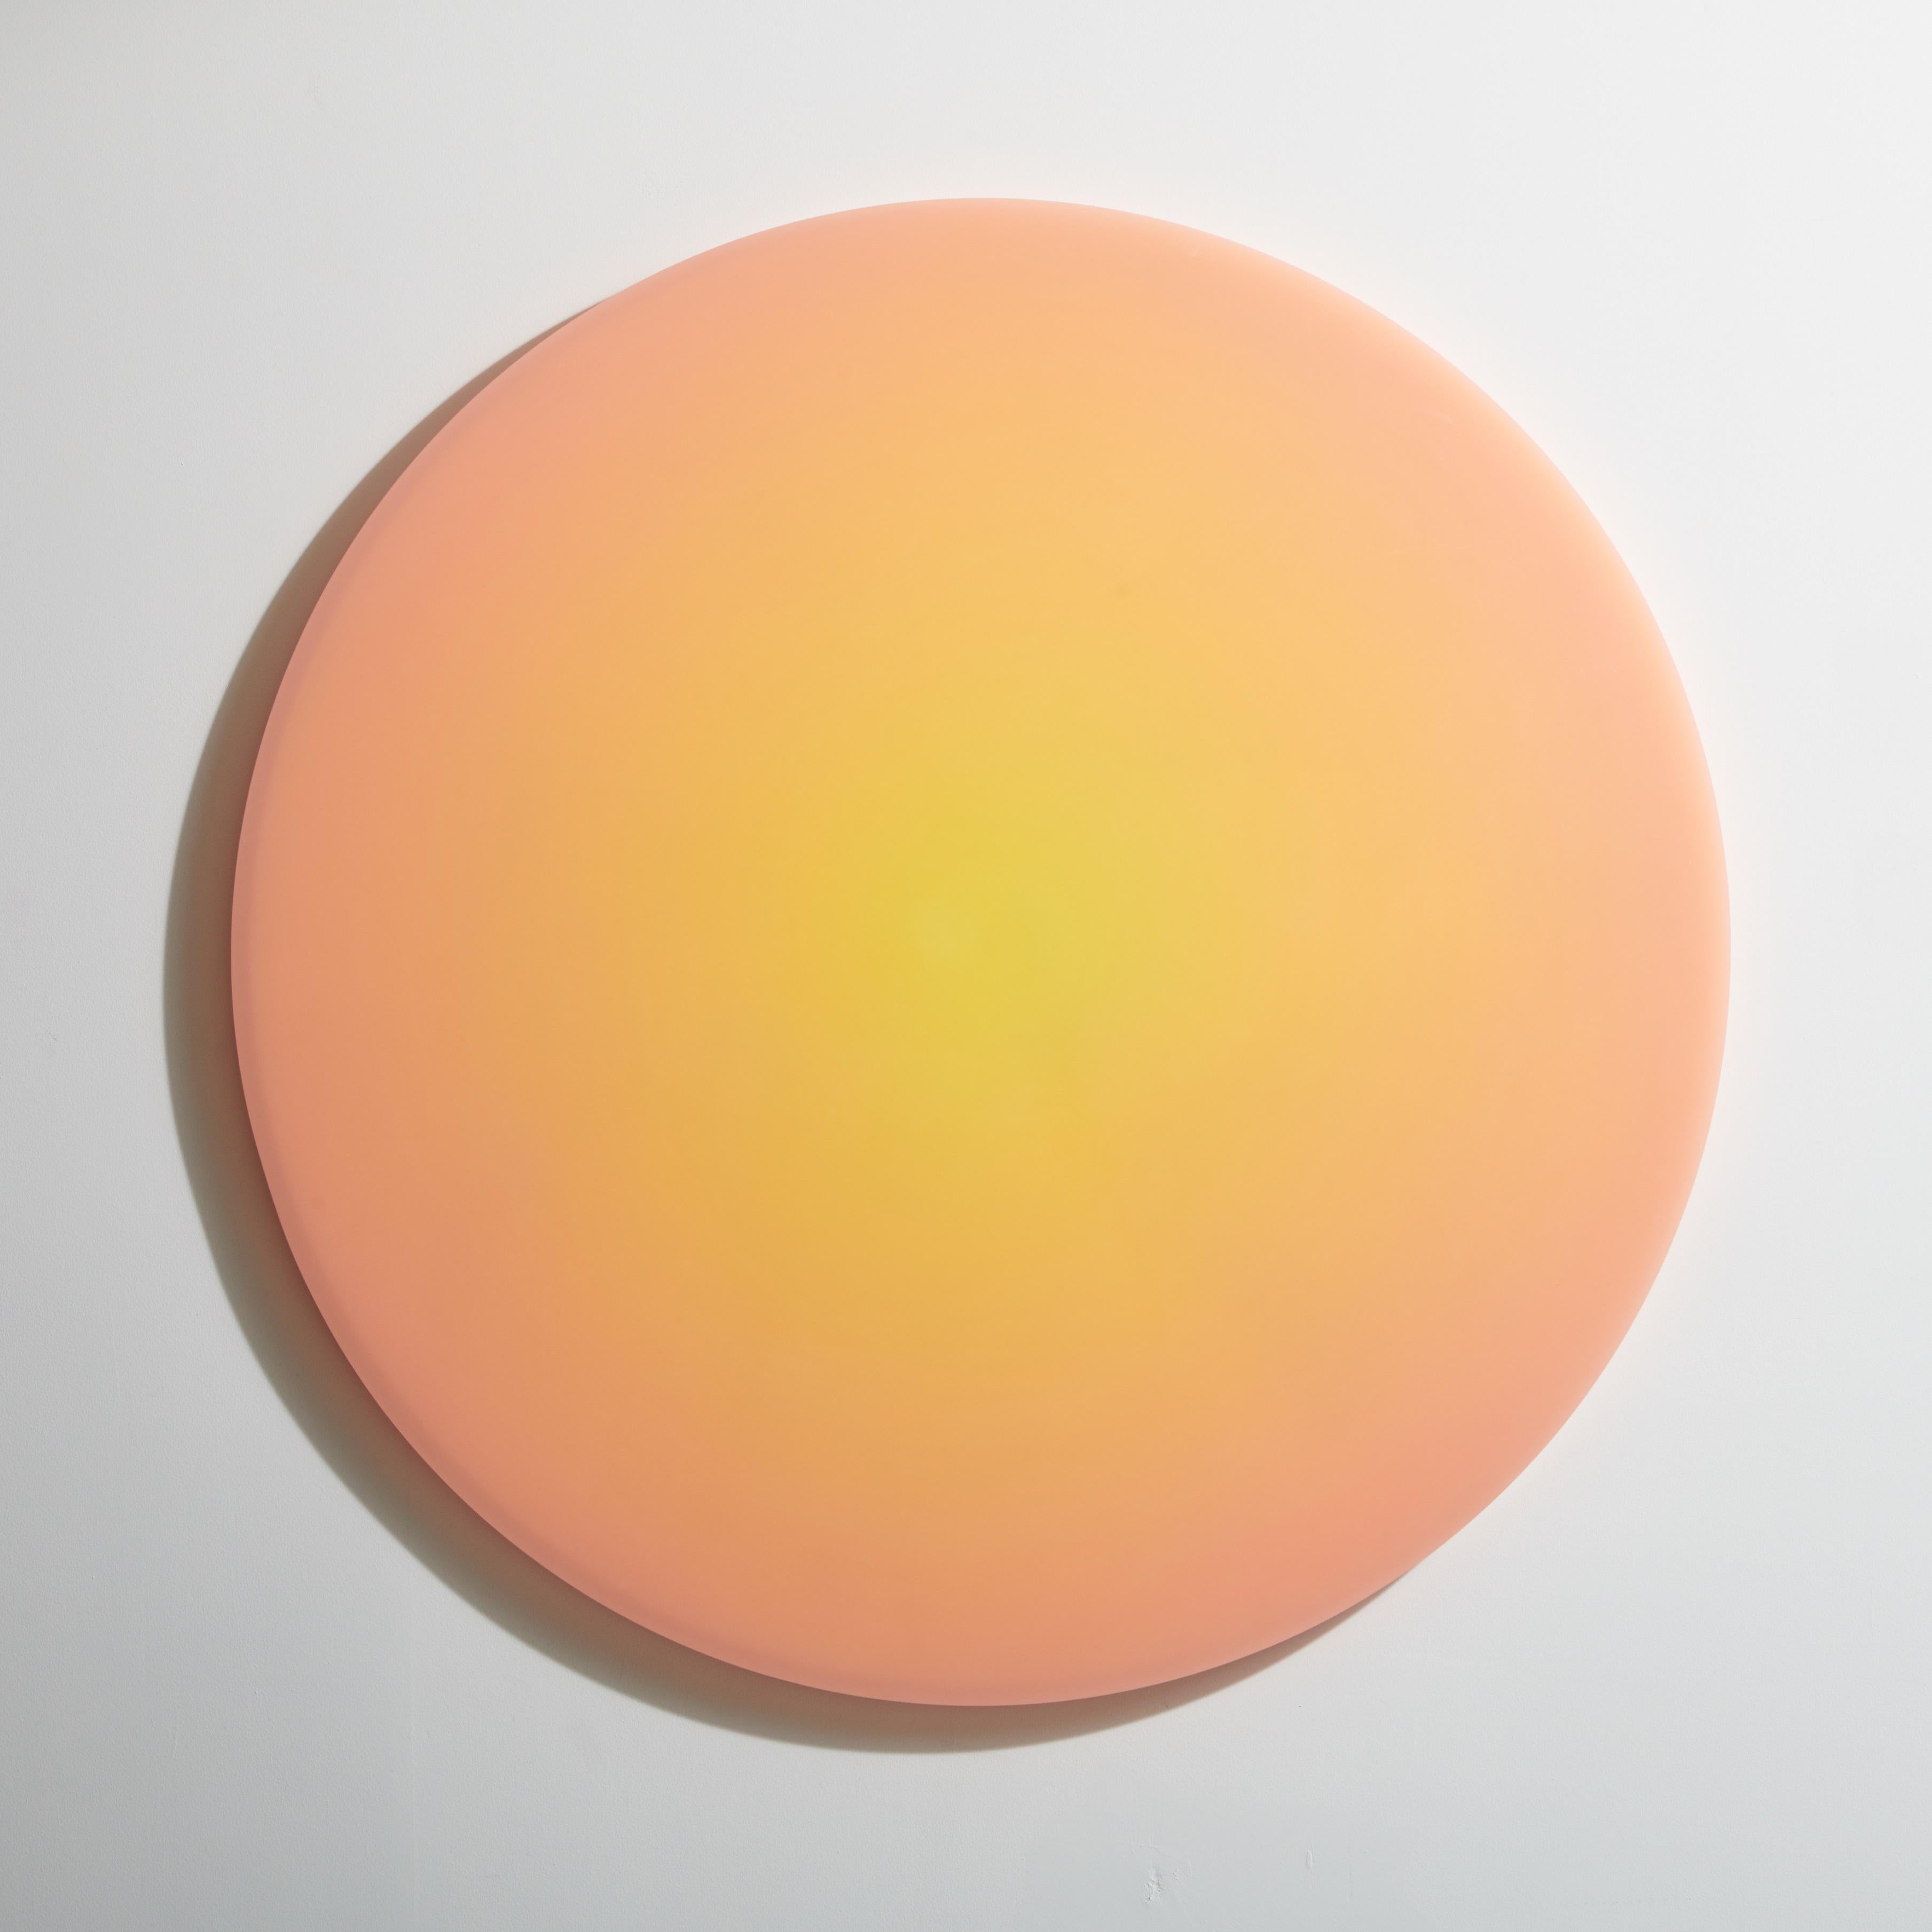 Large circular wall object features a warm hue transitioning from peach to beige. The shifting saturation levels create subtle changes in the way light is refracted from within. The exterior facets are sanded to a smooth-as-glass finish.